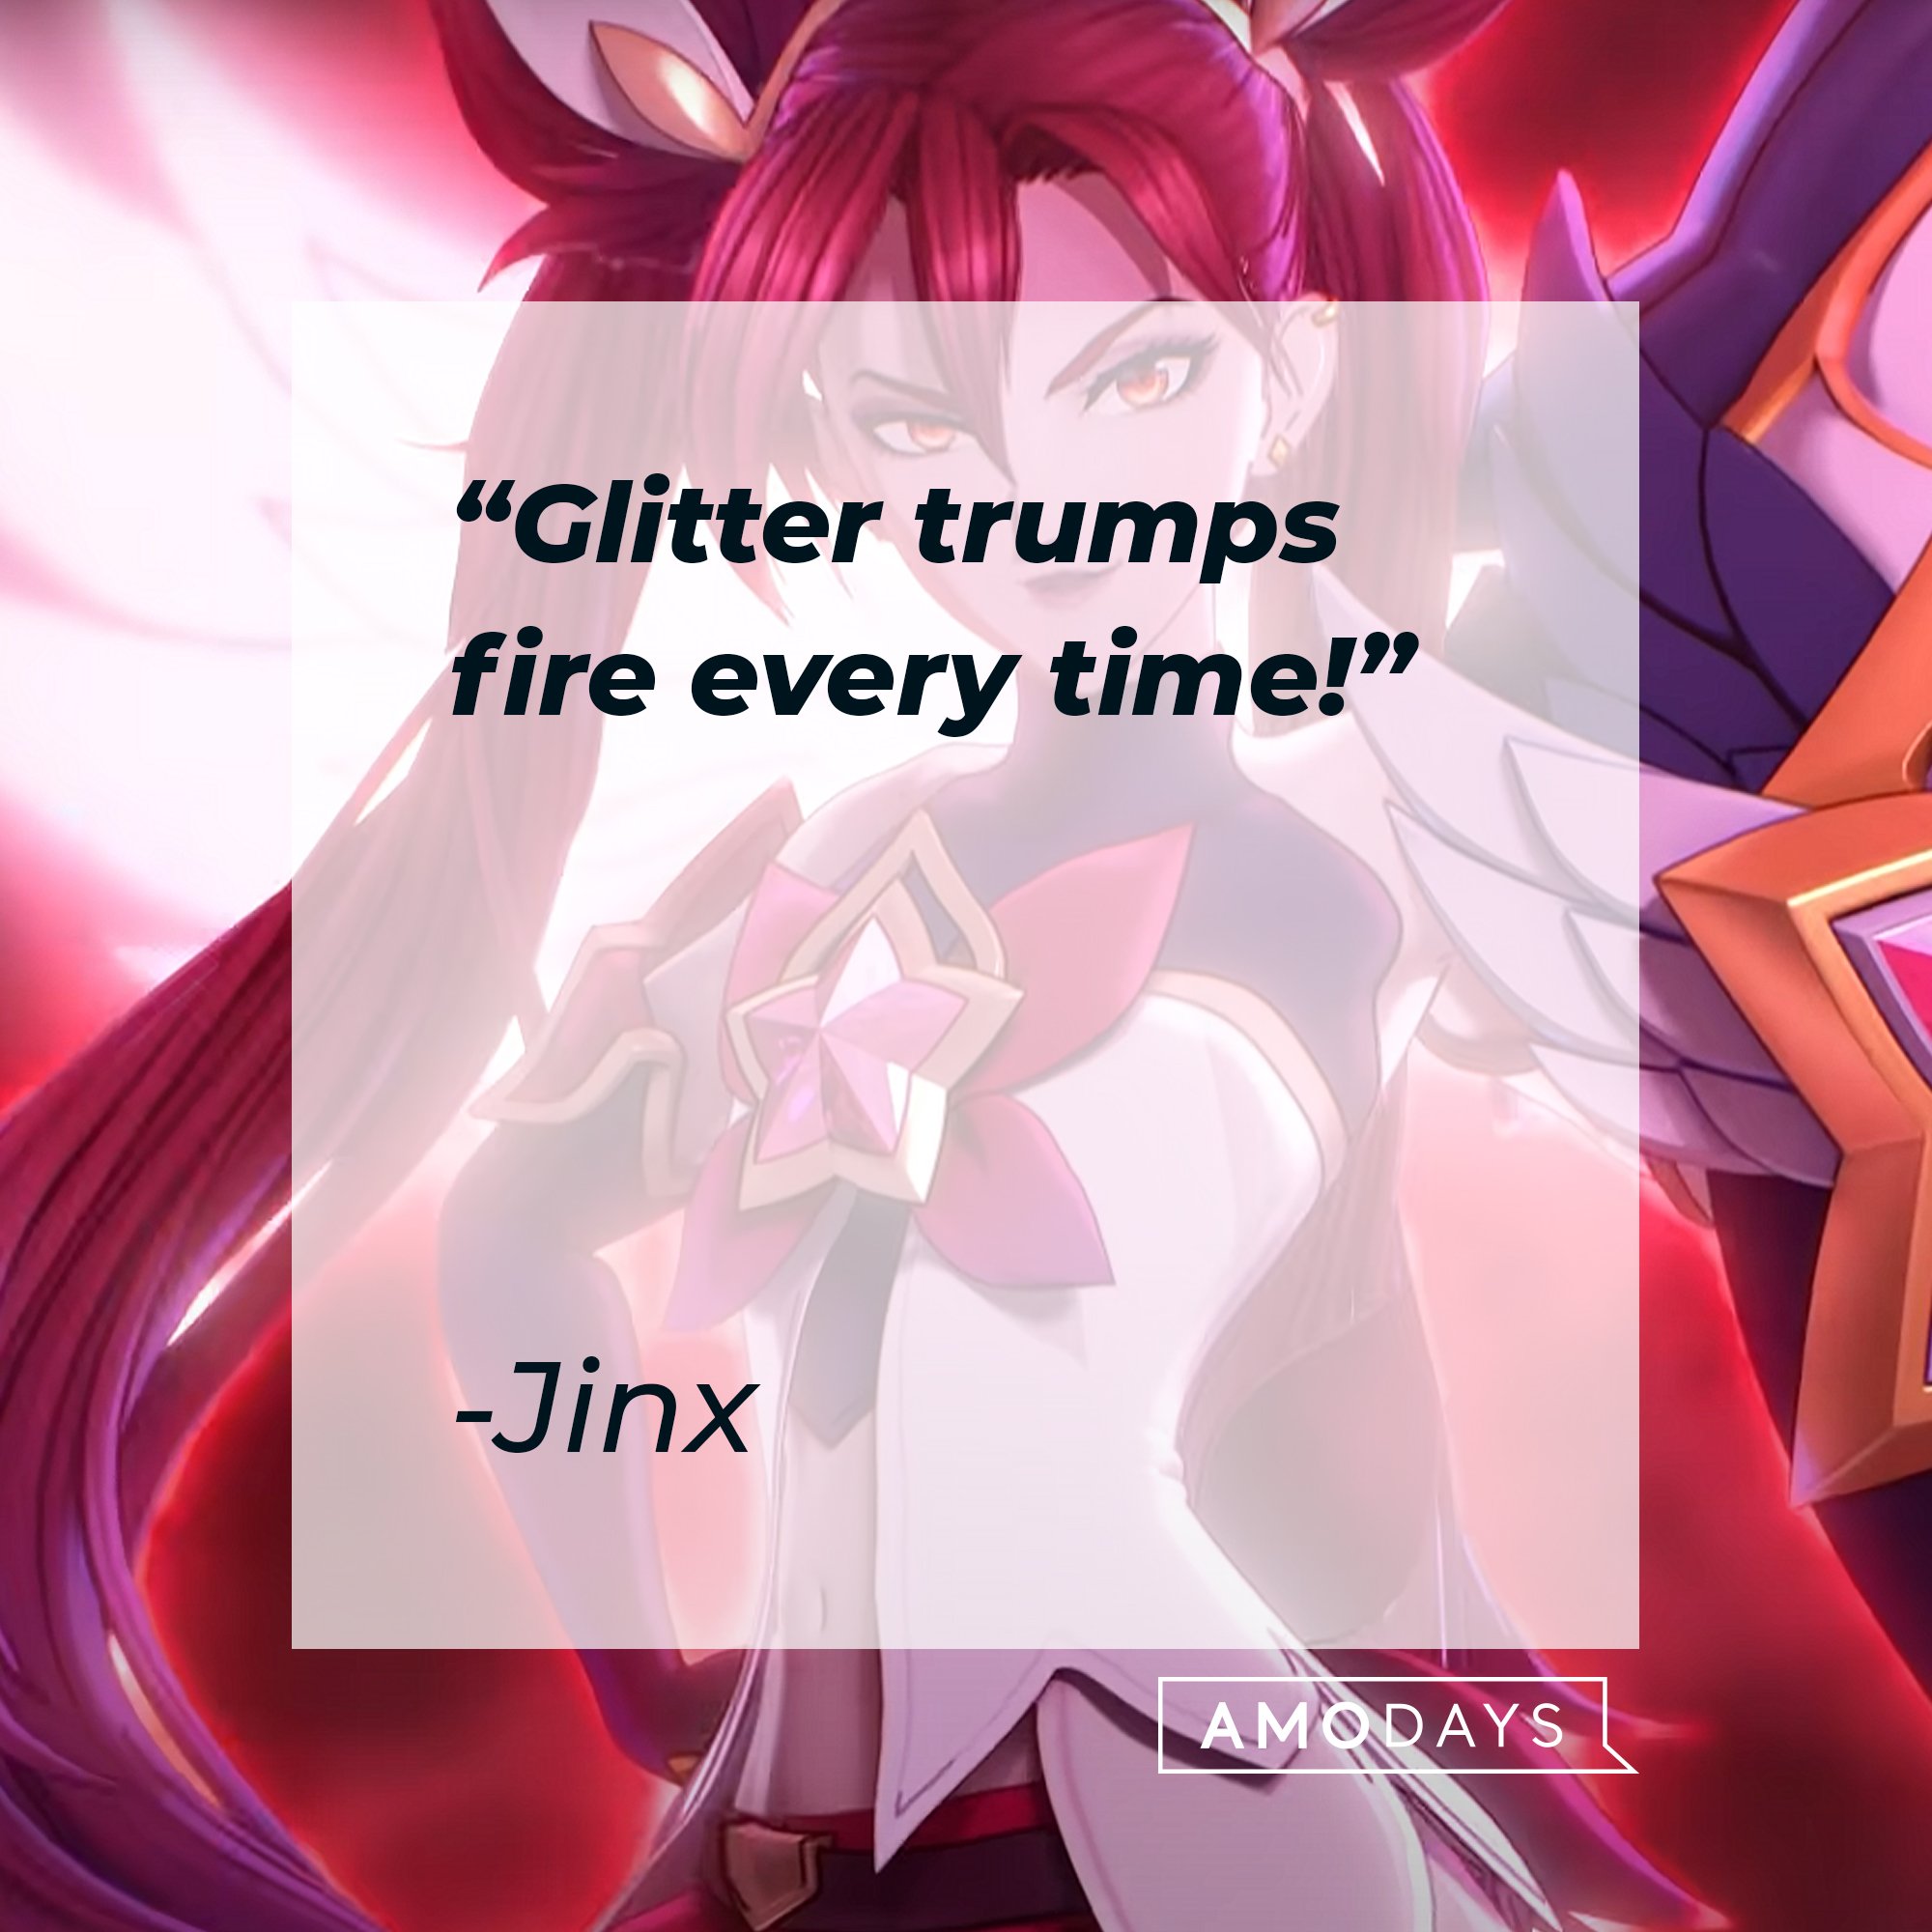 Jinx's quote: "Glitter trumps fire every time!" | Image: AmoDays